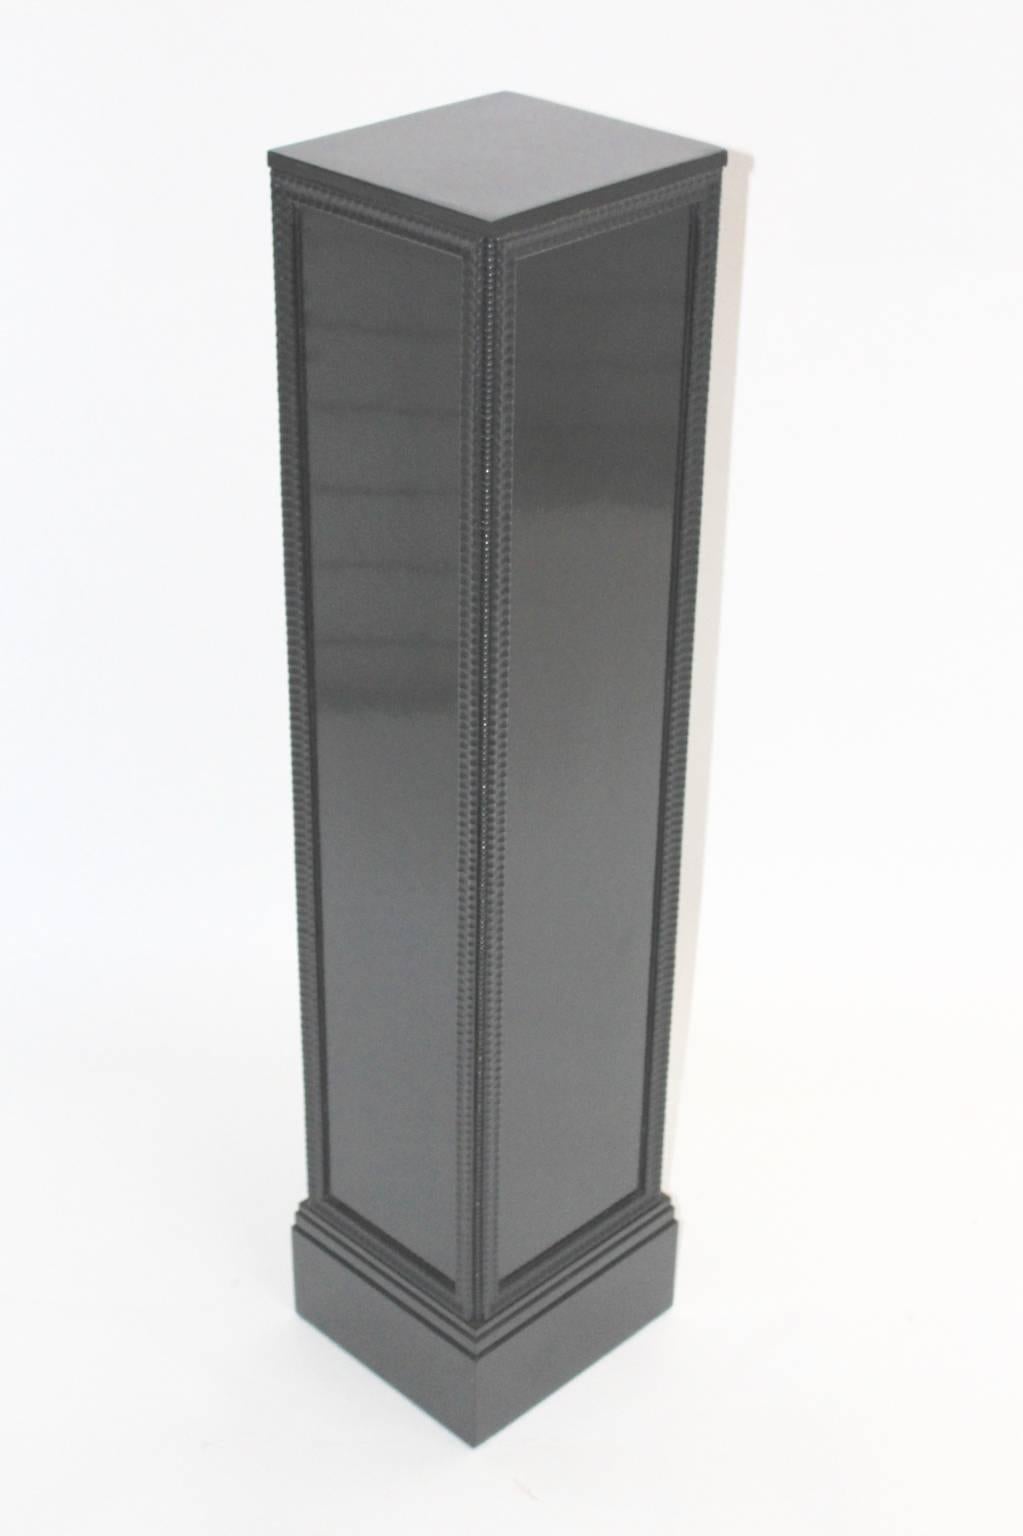 Black art deco vintage column features carved ledges and was the surface was black stained and polished.
The materials are spruce veneered with oak.
Very good condition.
all measures are approximate
